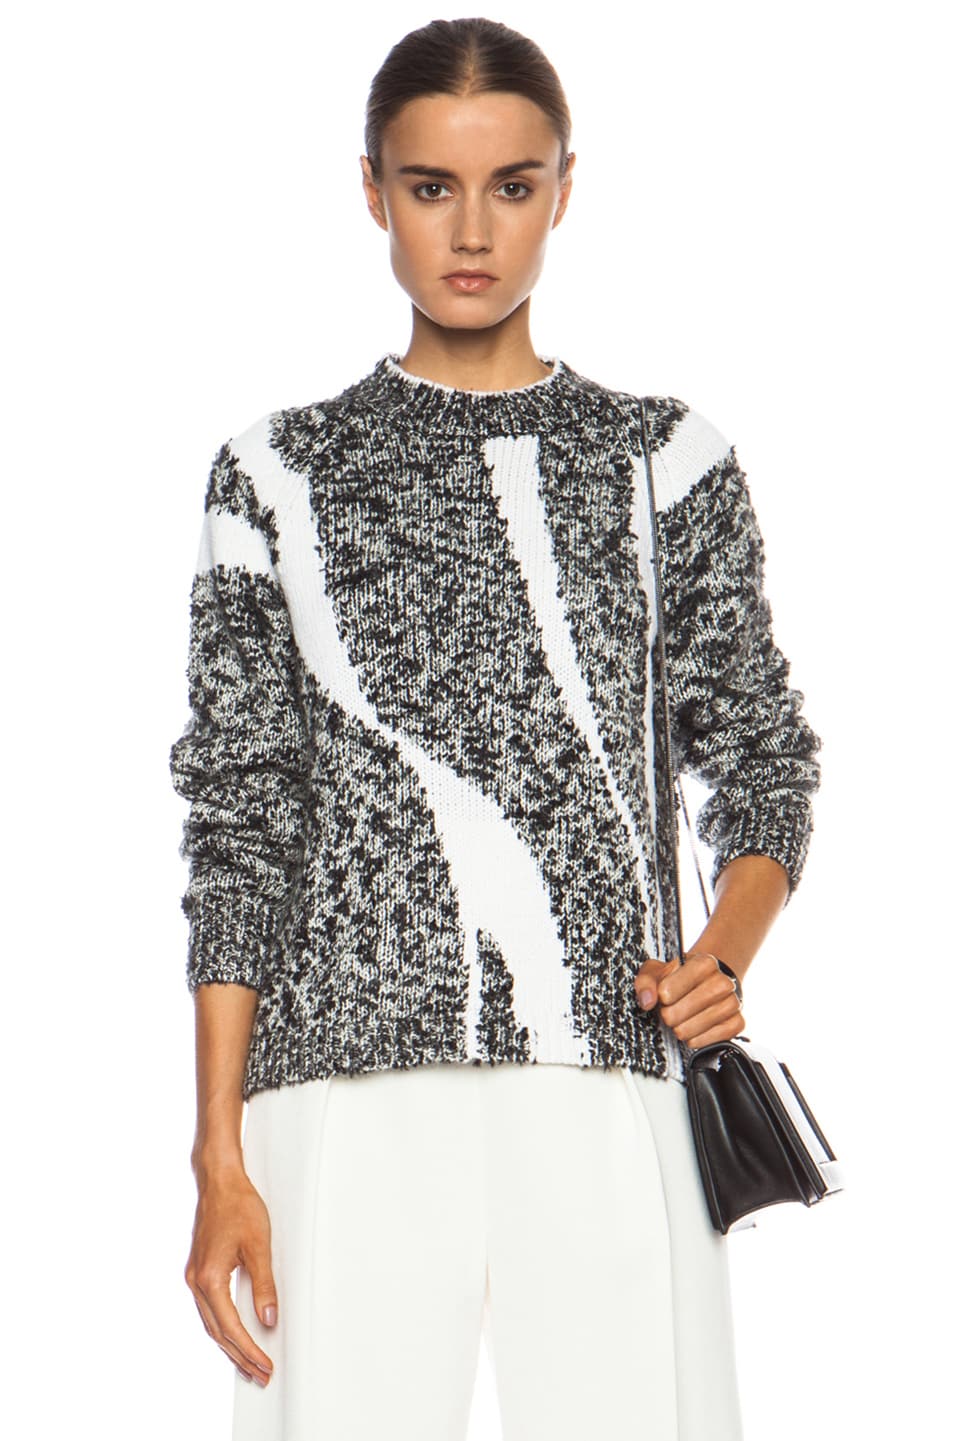 Image 1 of 3.1 phillip lim Abstract Stripe Cotton-Blend Sweater in Black & White